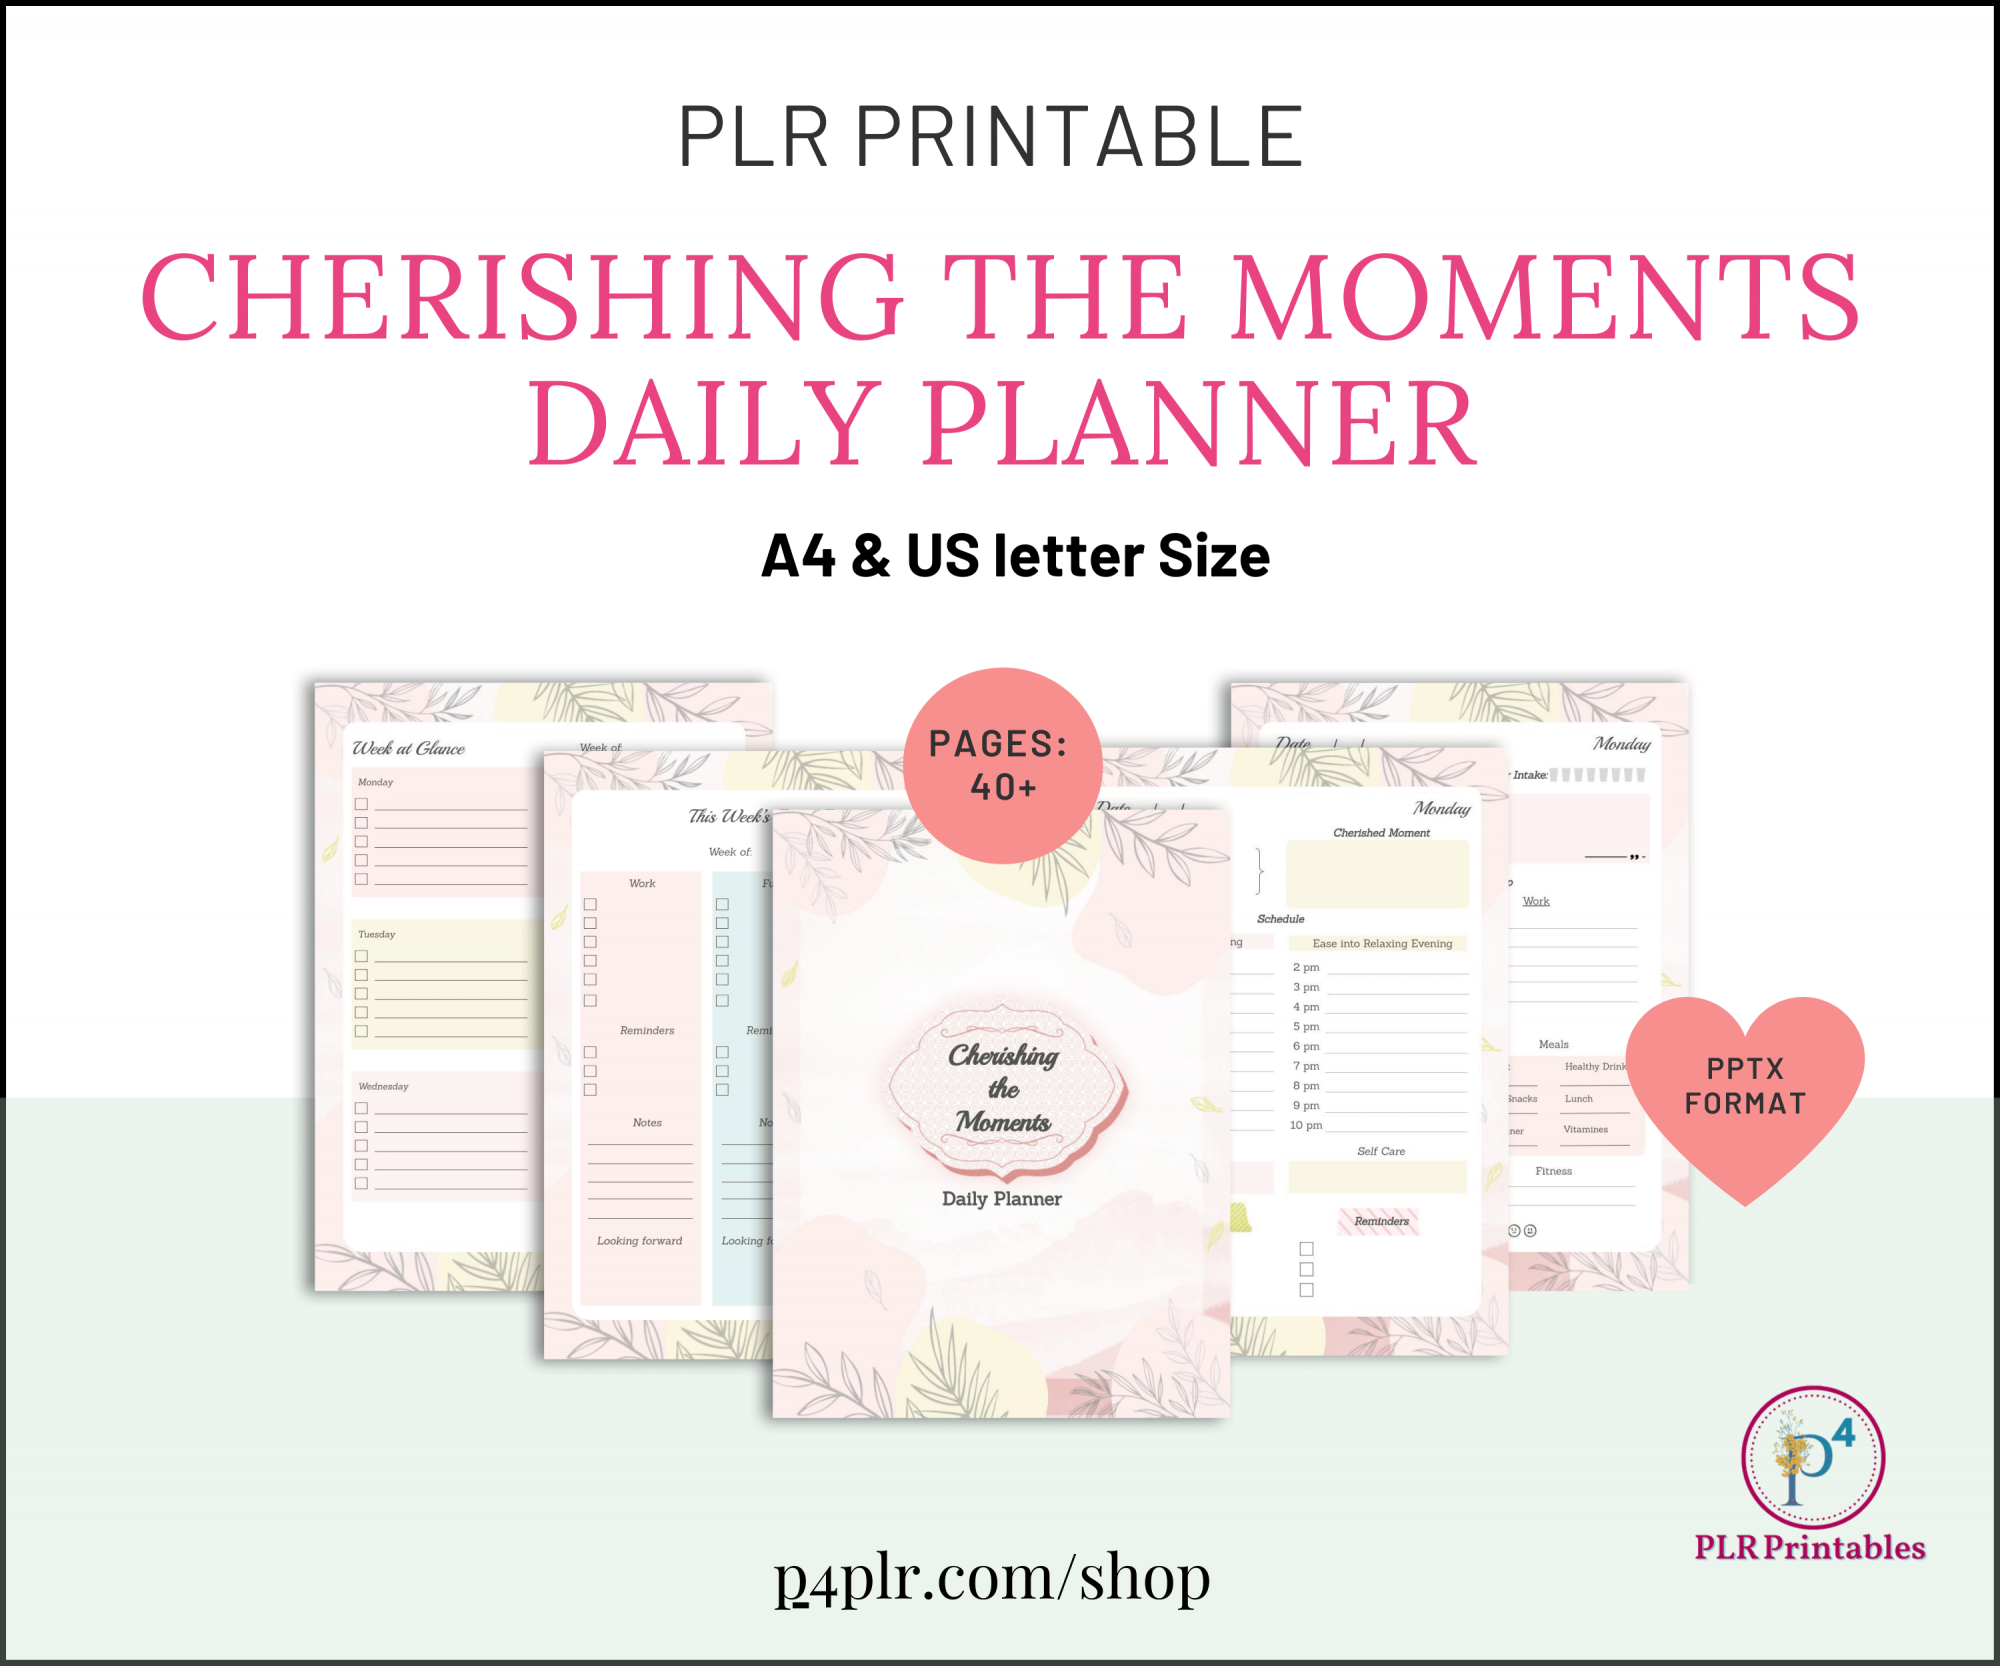 Cherishing the Moments Daily Planner